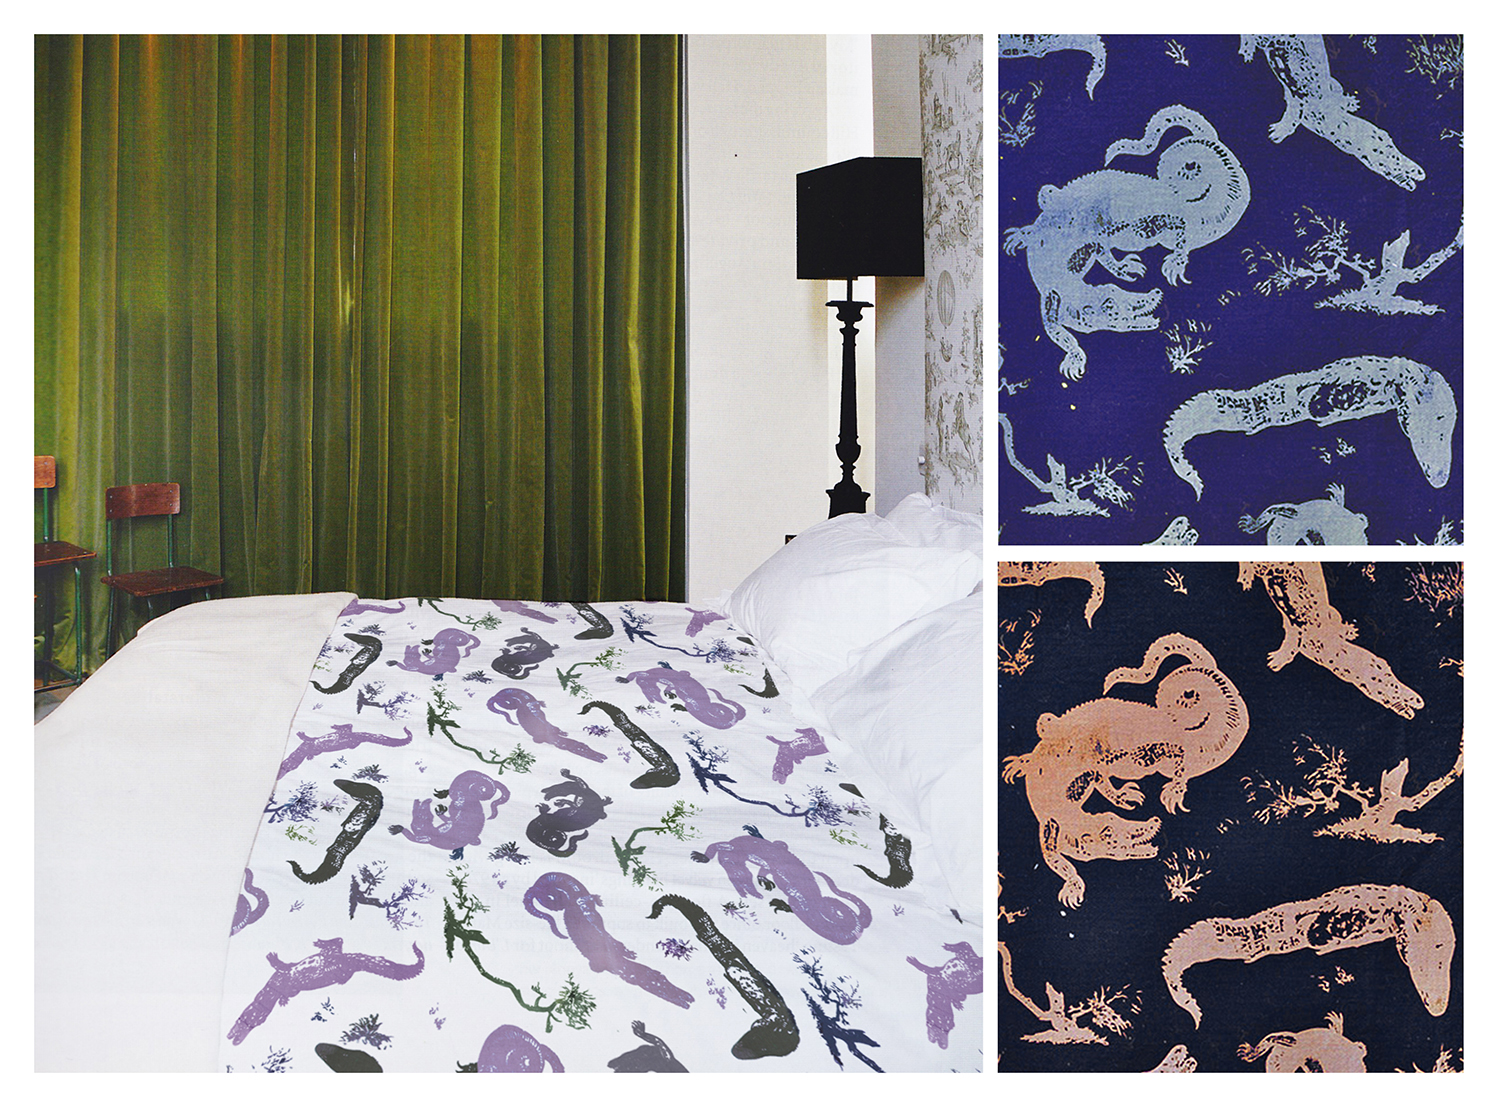    SWAMP TOILE   Shown in room, with details and colorways, hand&nbsp;screen-printed on mid-weight fabric 